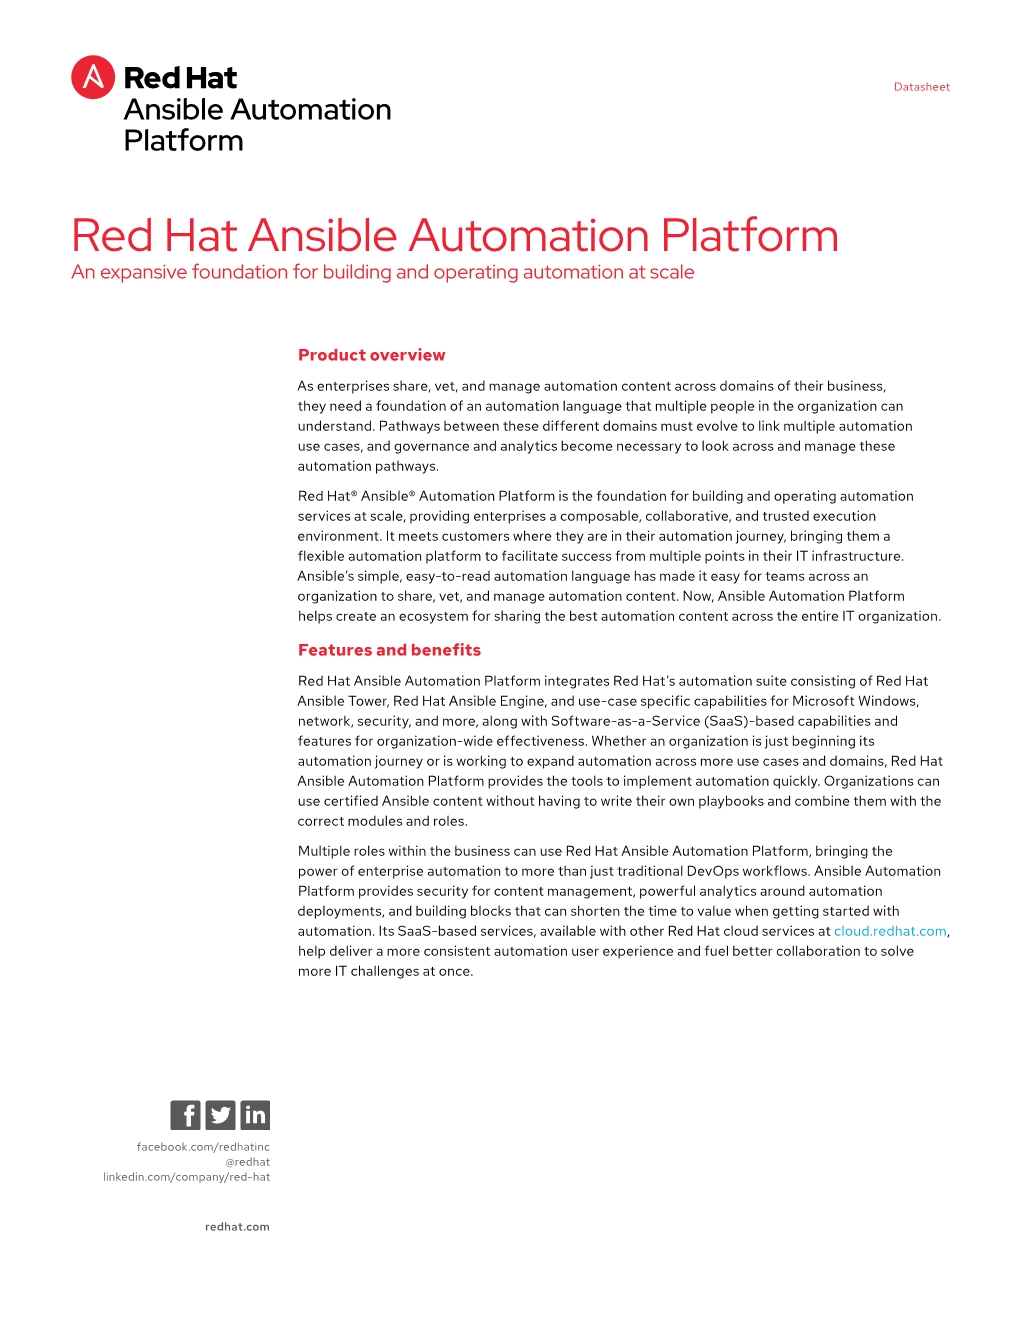 Red Hat Ansible Automation Platform an Expansive Foundation for Building and Operating Automation at Scale